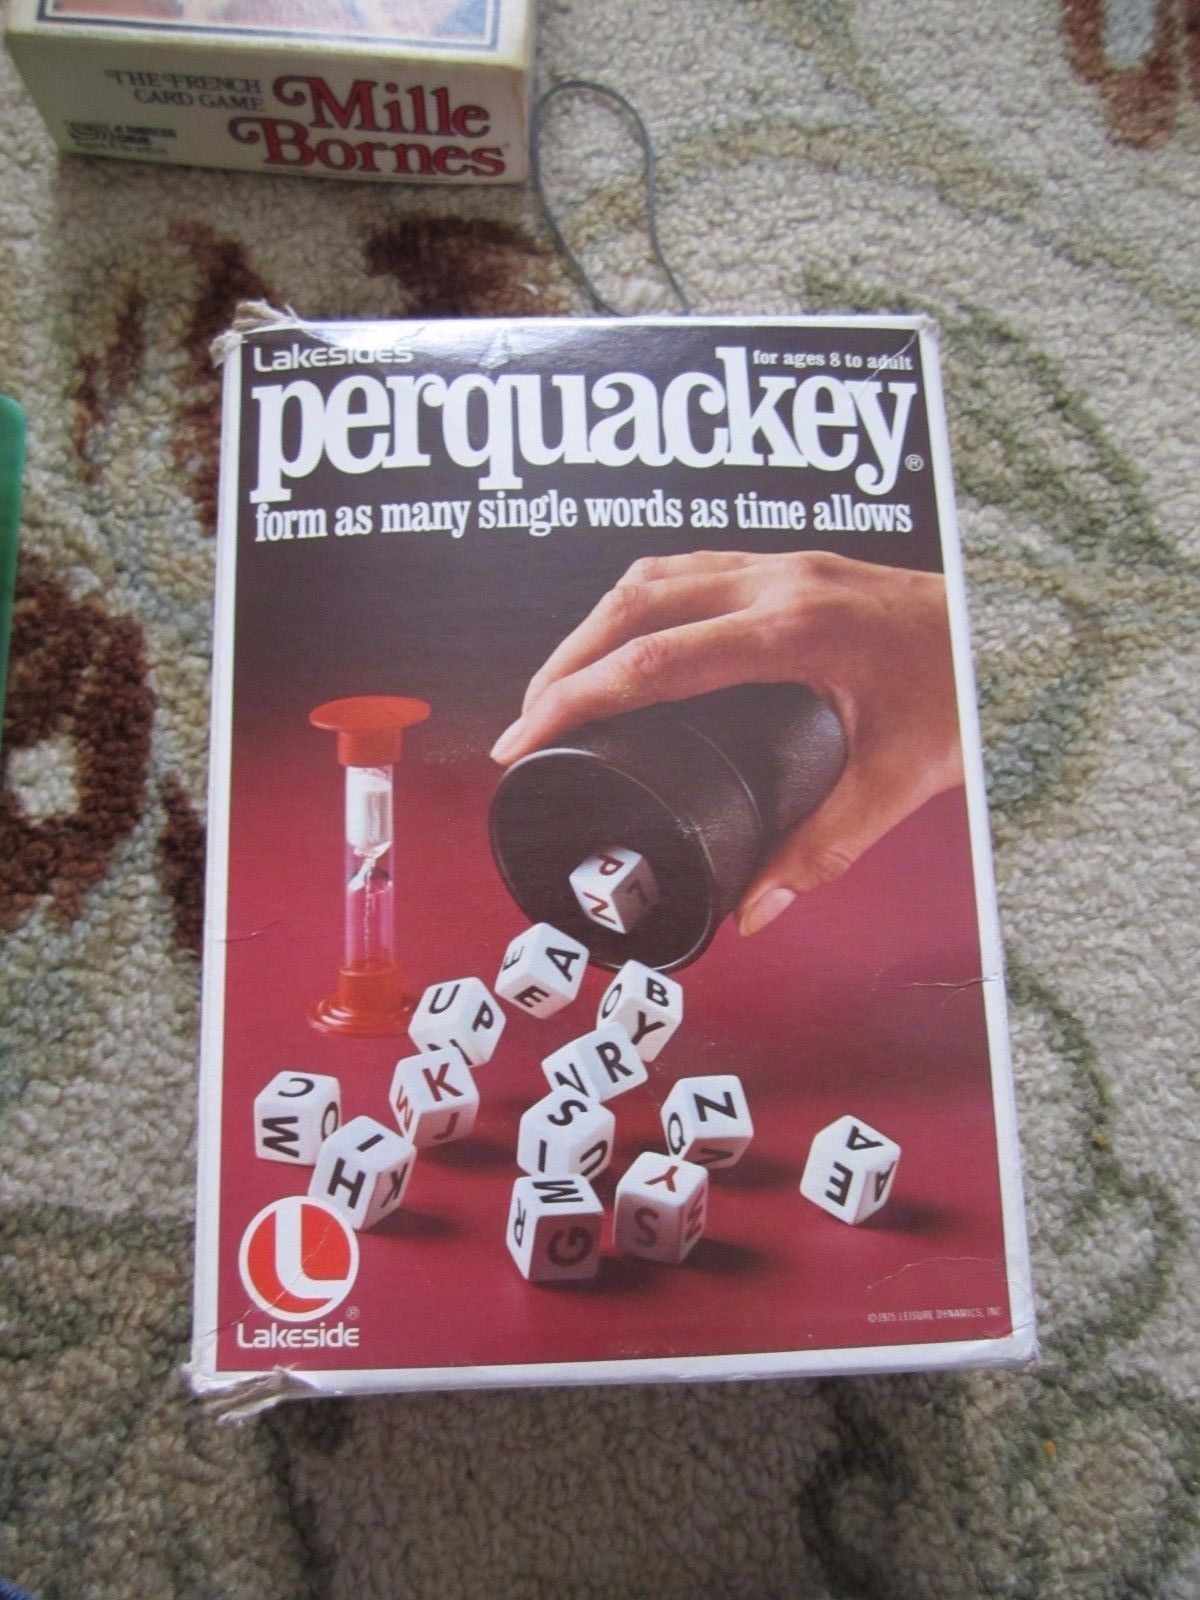 Vintage Perquackey Word Dice Game Lakeside 1975 No 8313 for sale online 